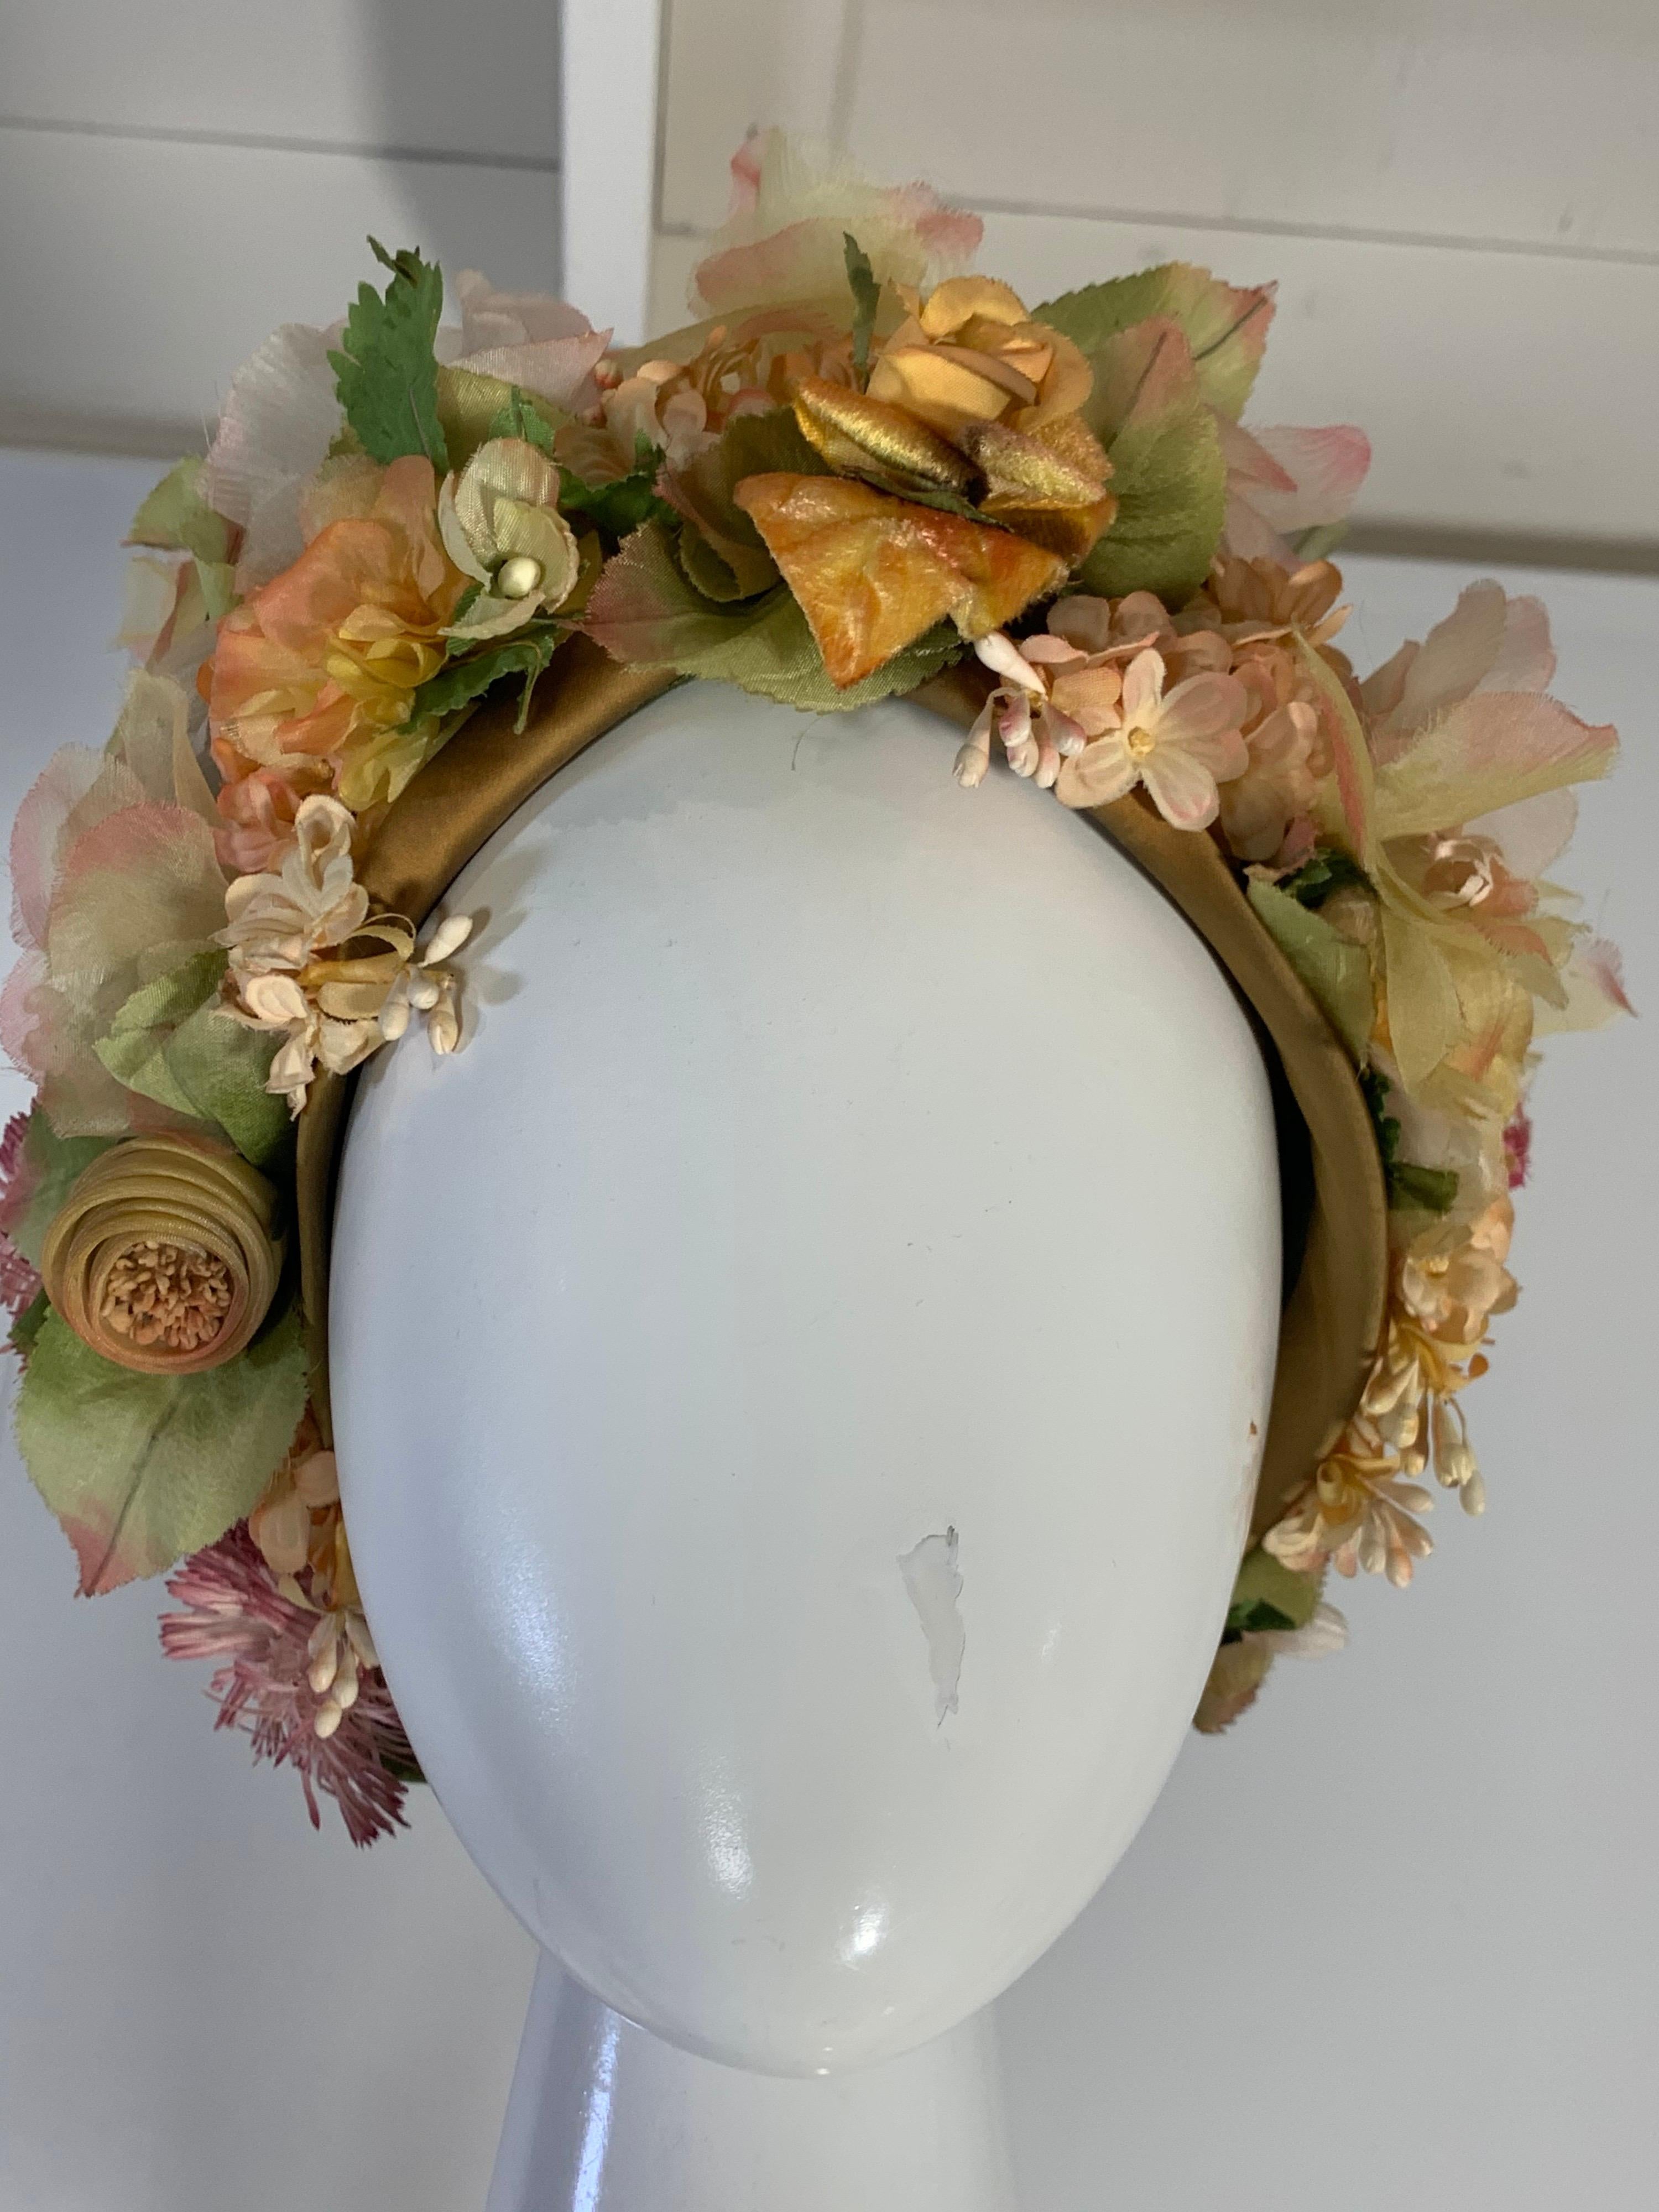 1960s Christian Dior silk spring floral turban hat by Marc Bohan for Dior. Beautiful muted florals and greenery are so delightful!  Mesh base fabric with satin edging. Size 22. Medium